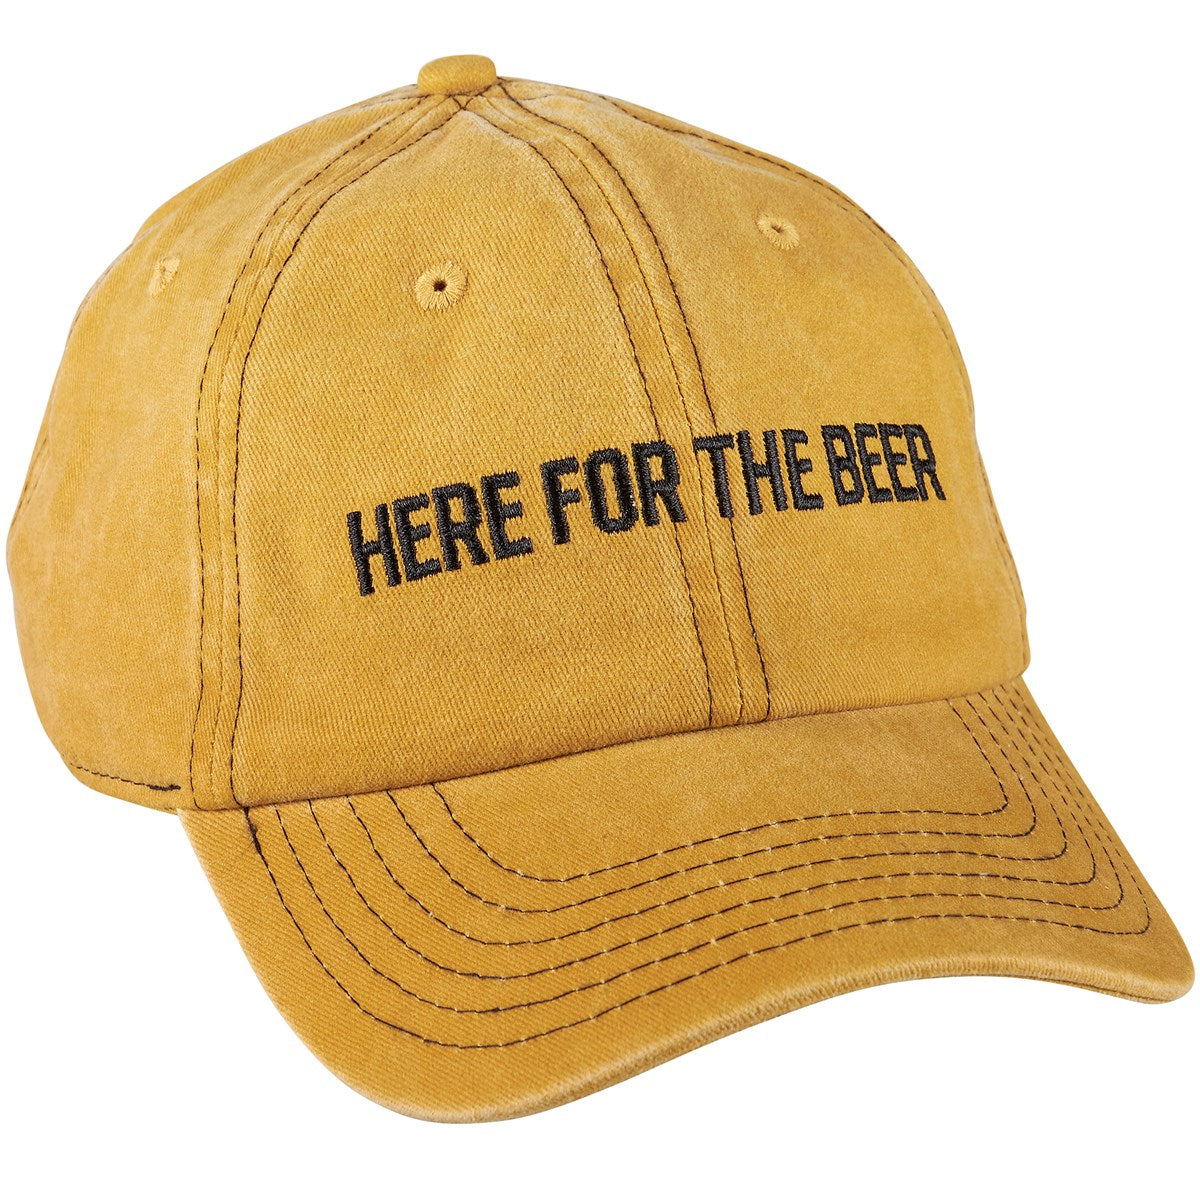 "HERE FOR THE BEER" BASEBALL CAP